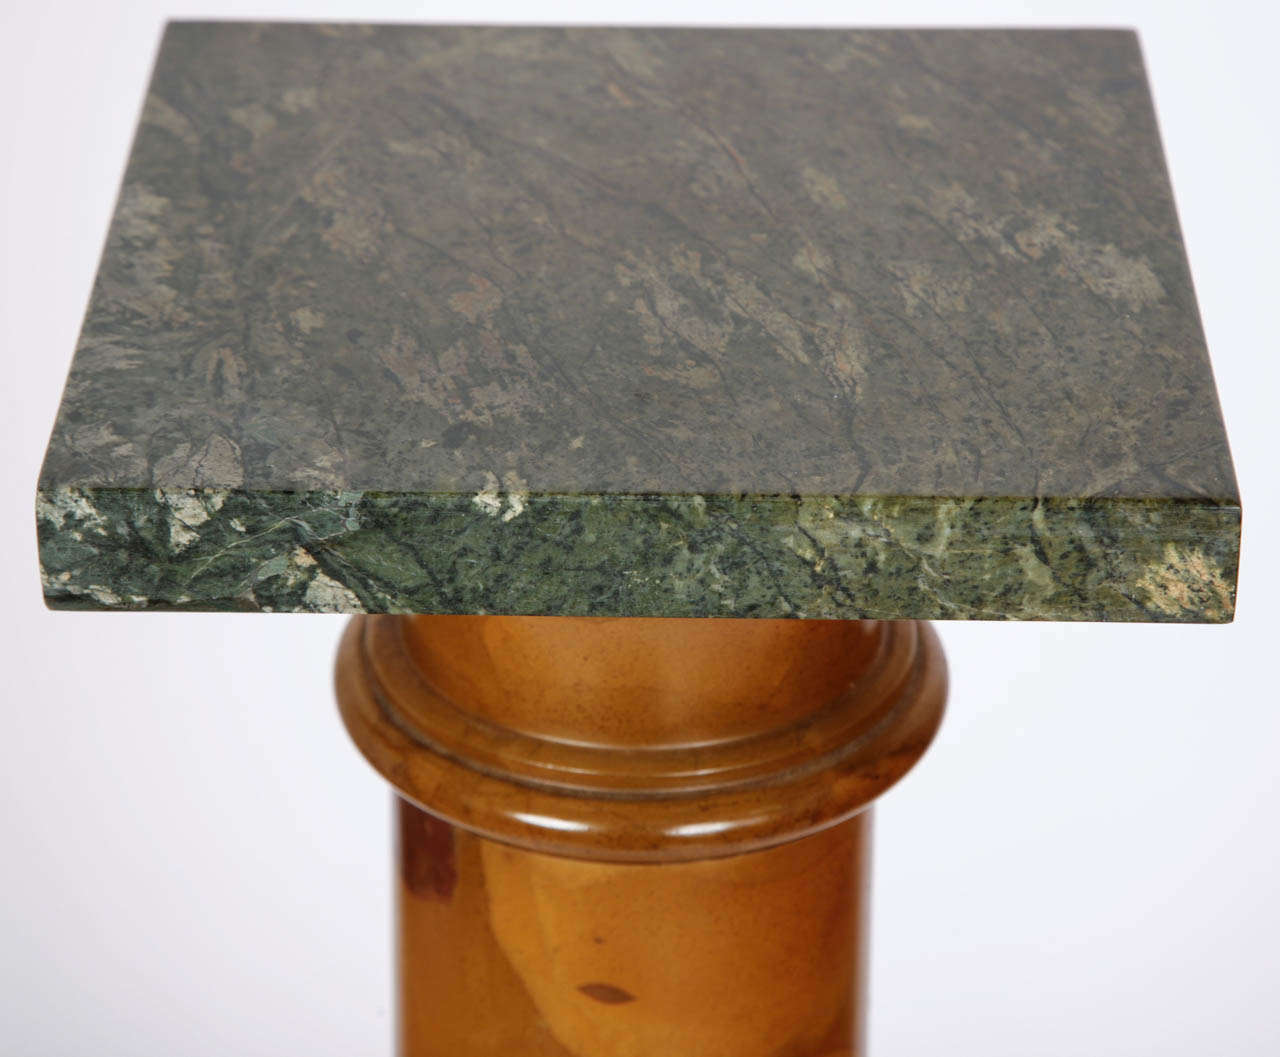 A honey-colored onyx column with green marble top. 

Measures: Height 105.5cm, the base 28 x 28cm, the top 20.5 x 20.5cm